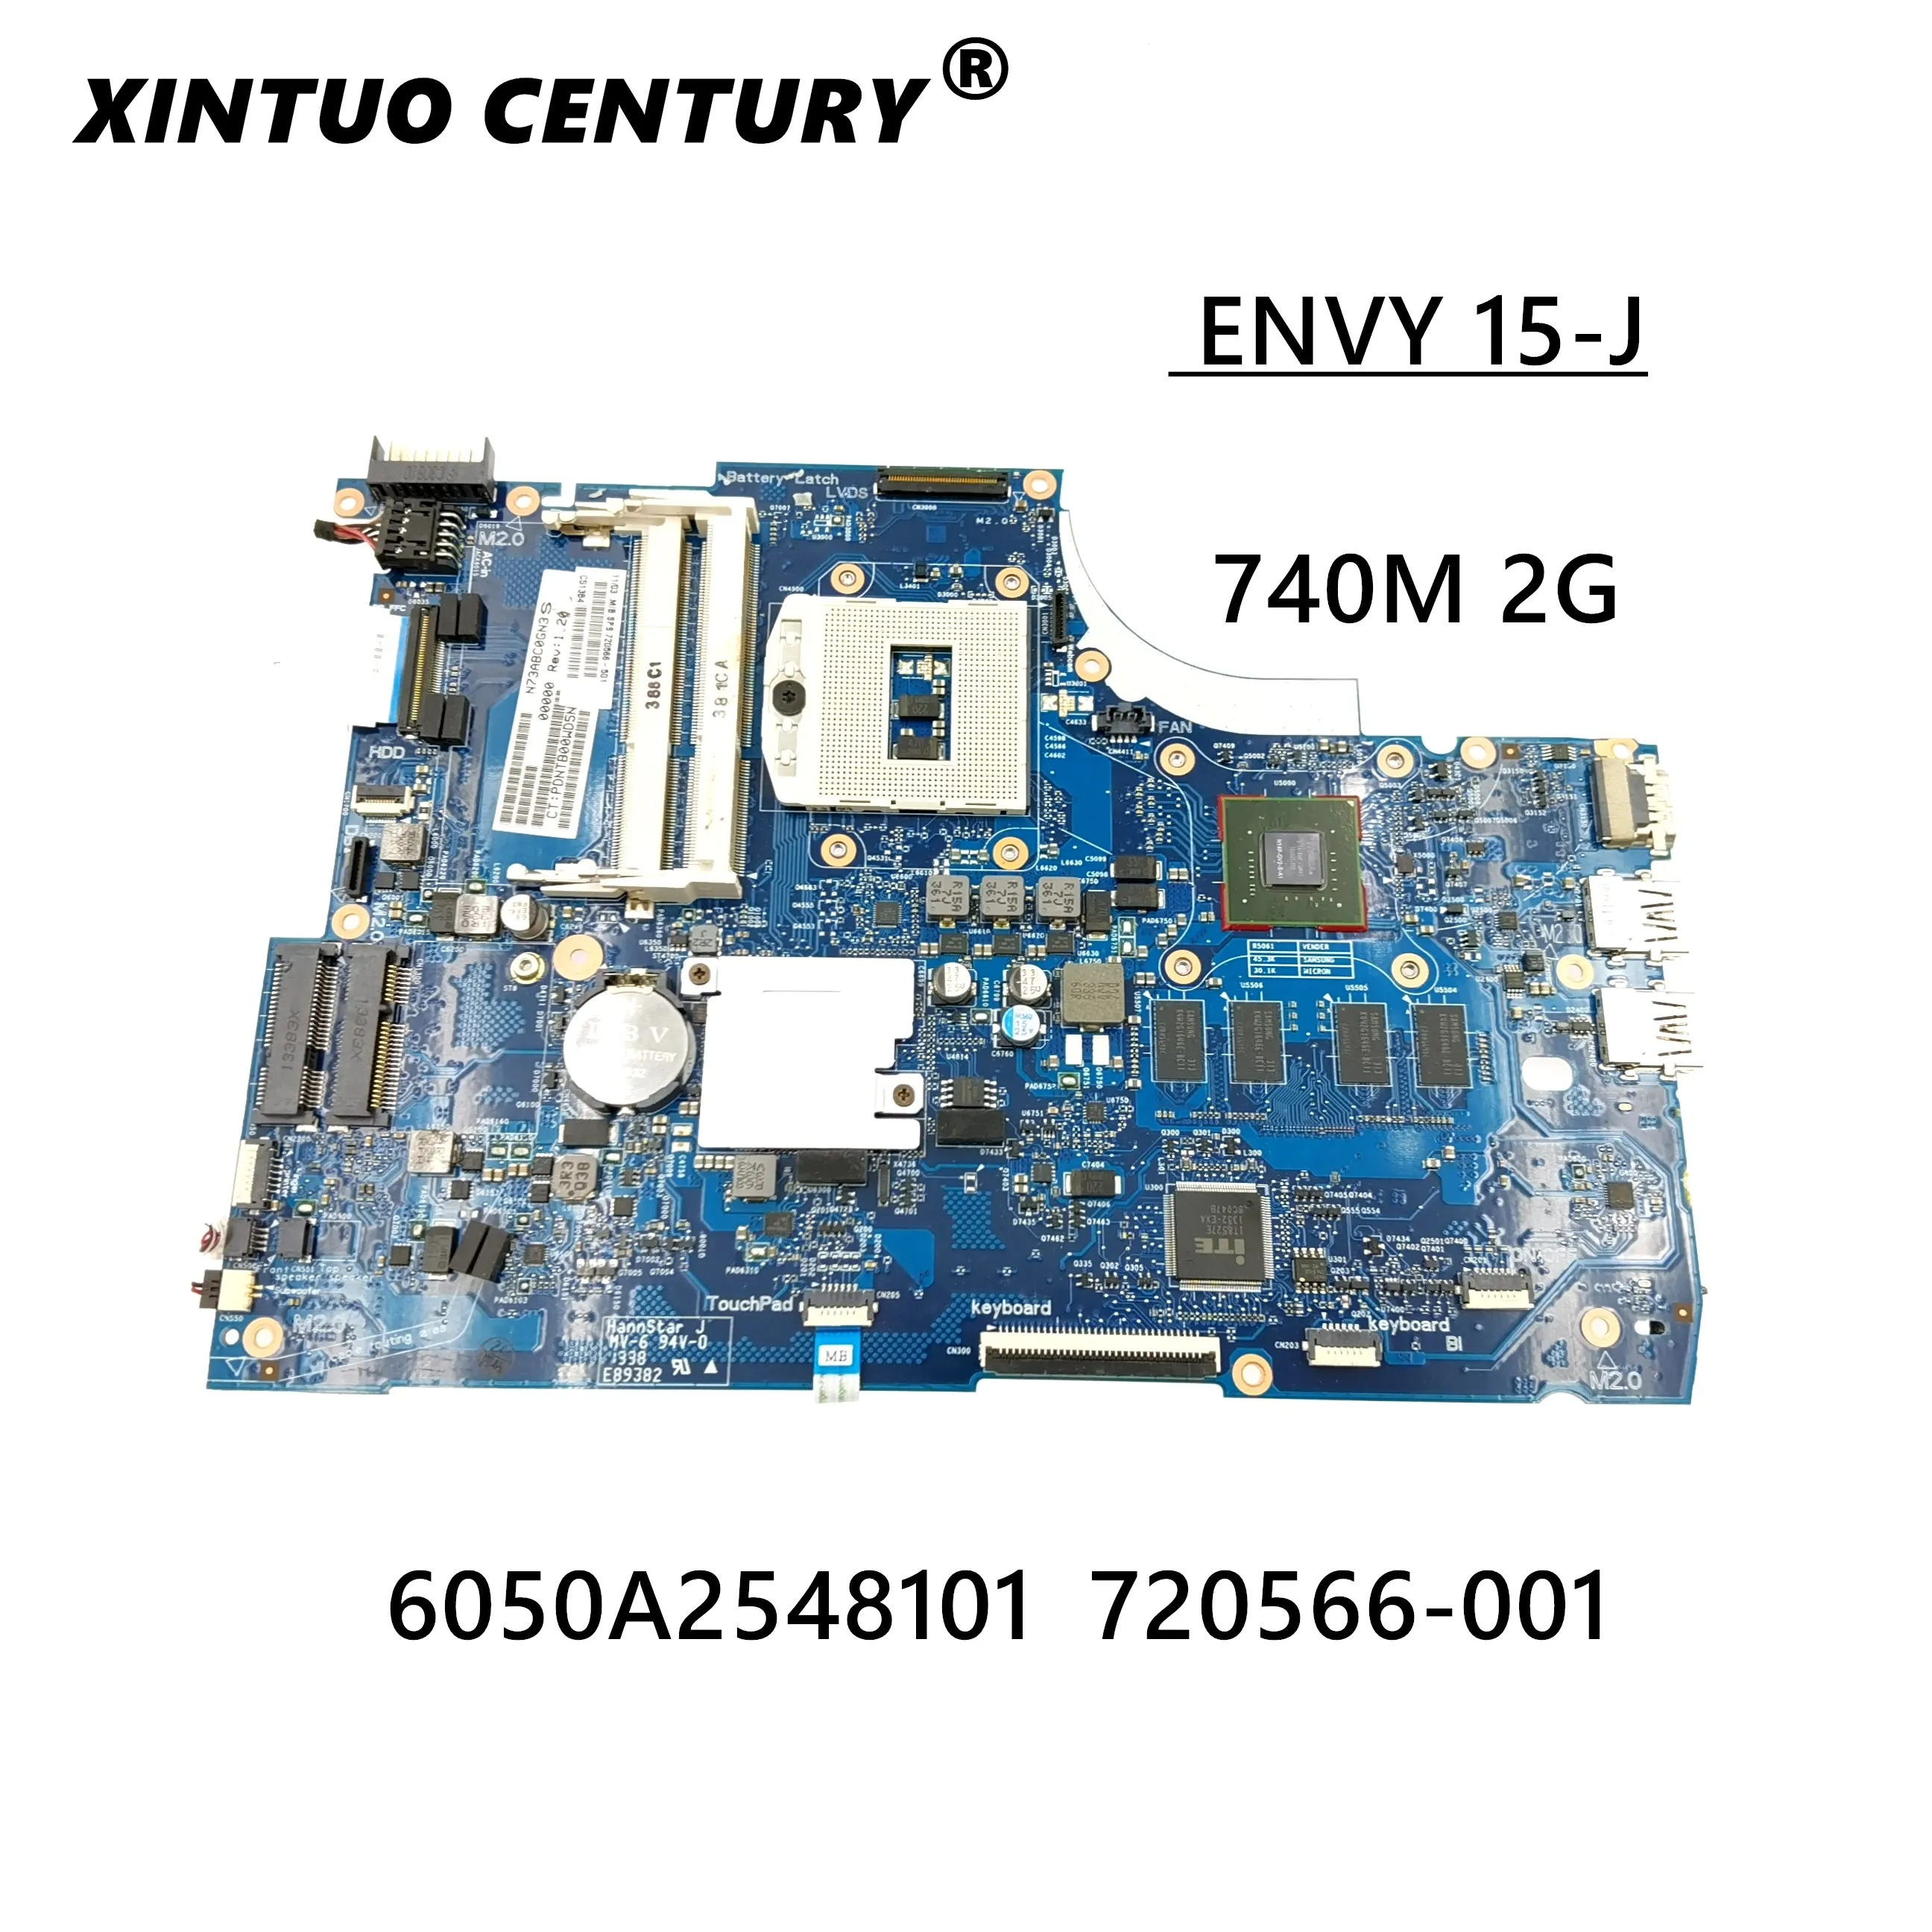 

720566-501 720566-001 6050A2548101-MB-A02 for HP ENVY 15-J 15T-J Laptop motherboard 740M/2G 100% working